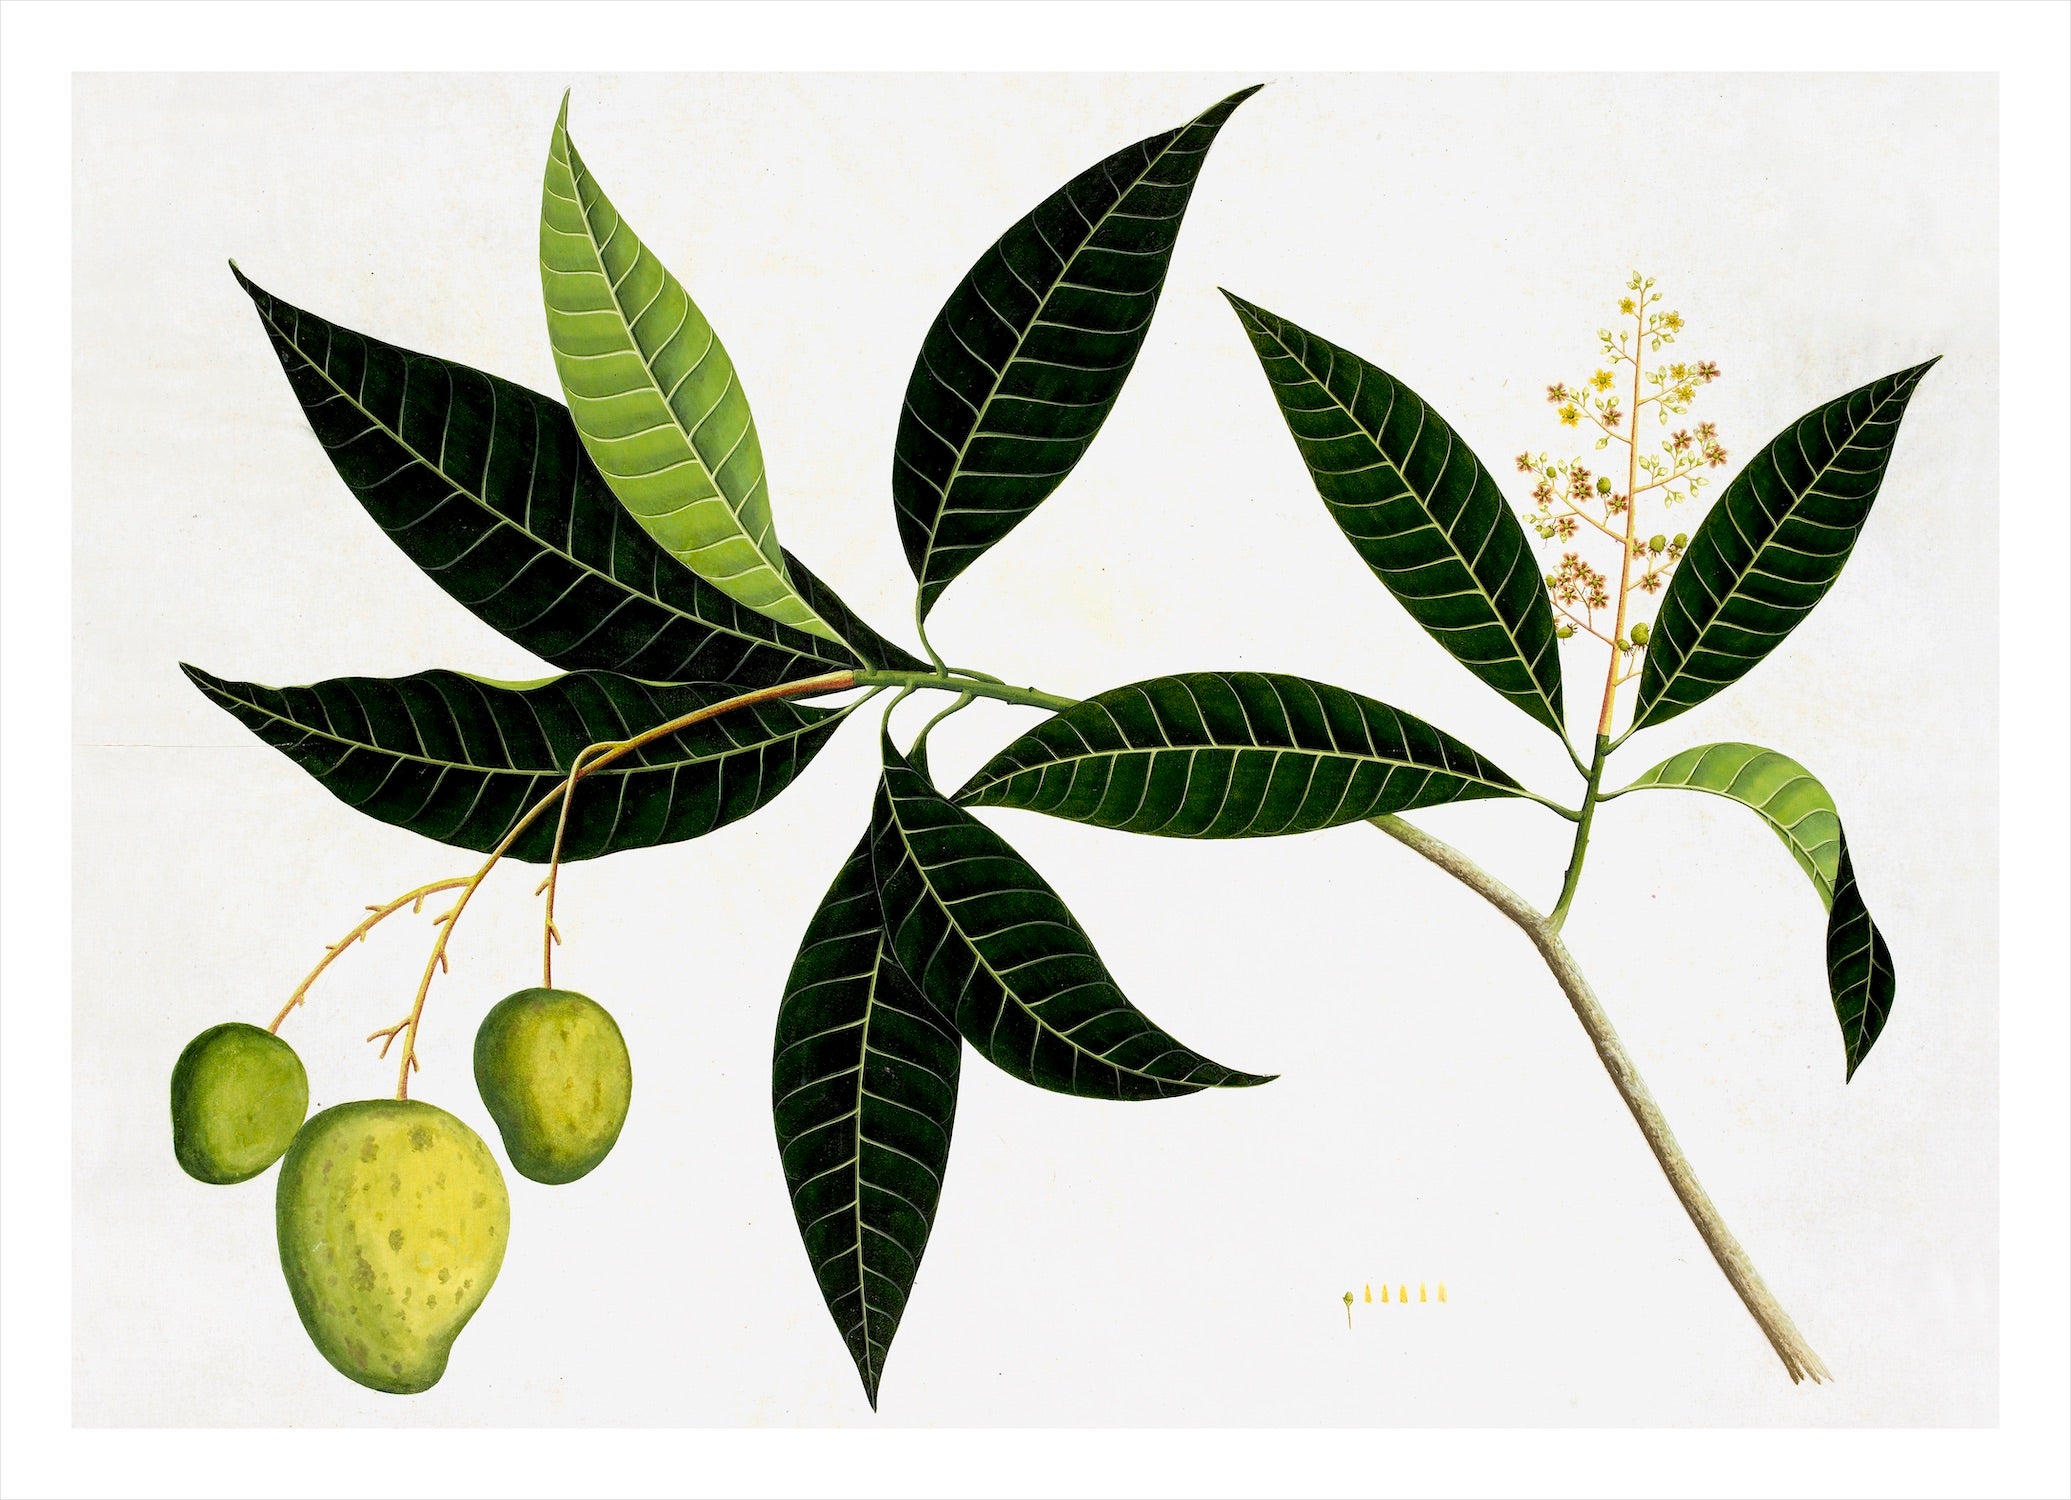 Remastered 19th C. Anglo-Indian Botanicals